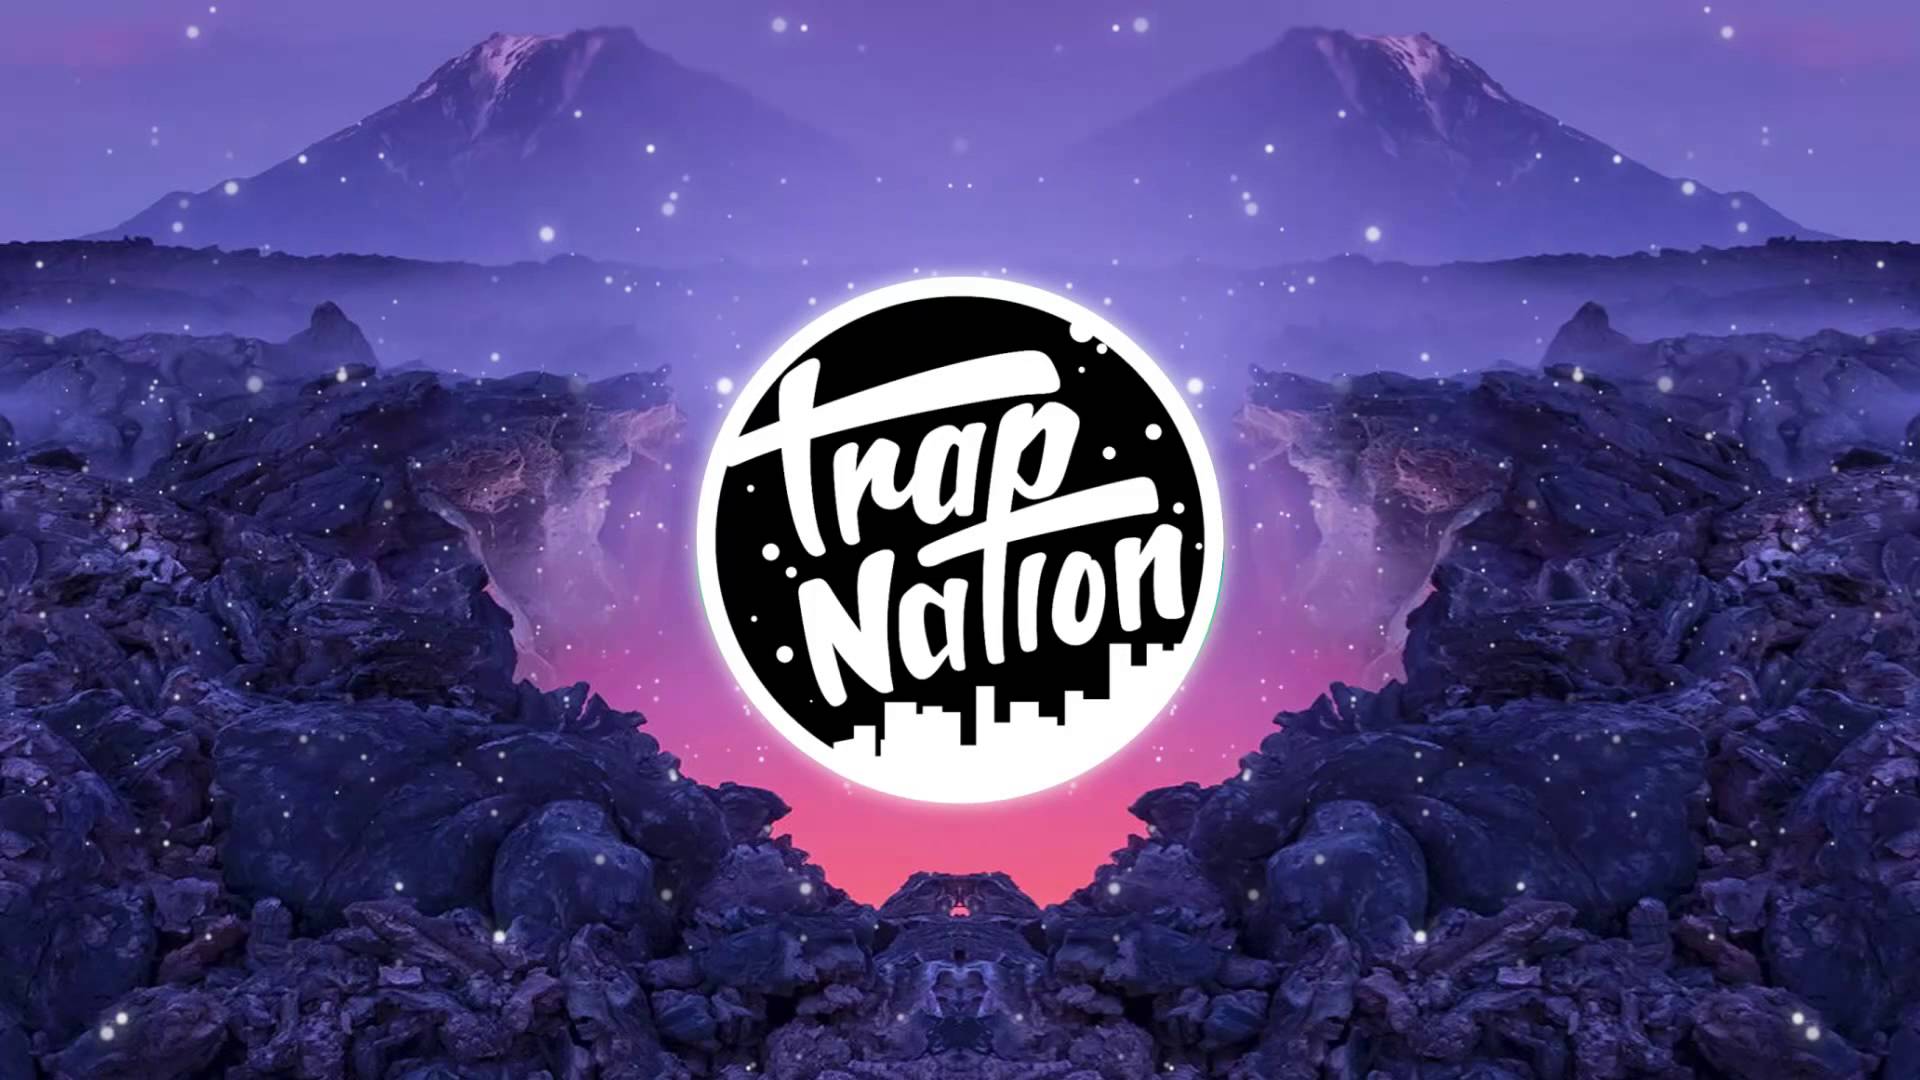 Trap Nation Wallpapers - Wallpaper Cave